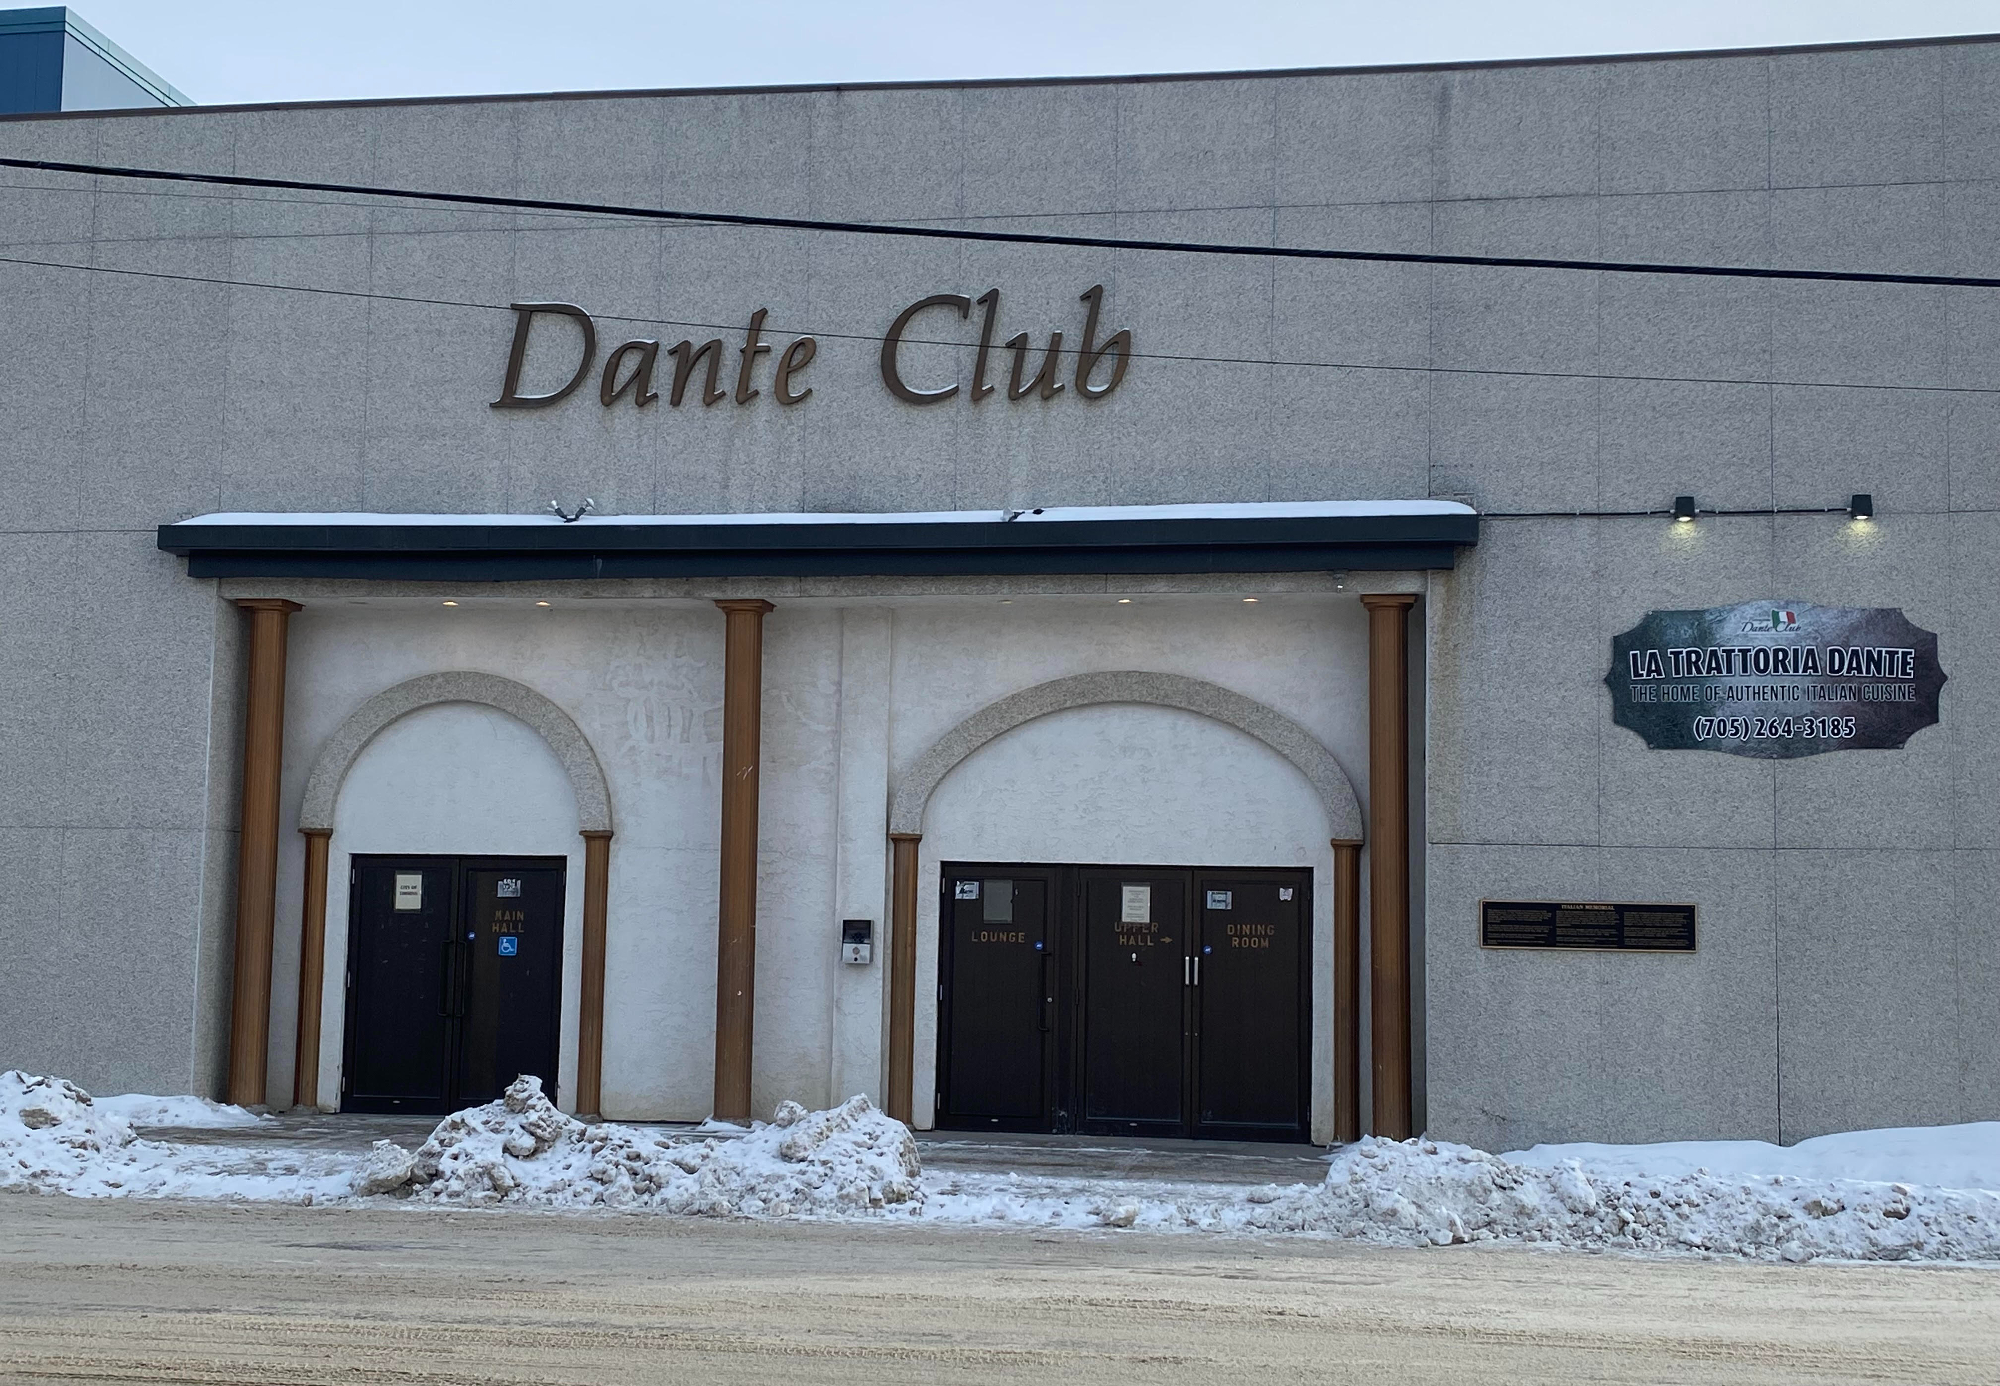 Renovations upping the Dante Club's game - Timmins News